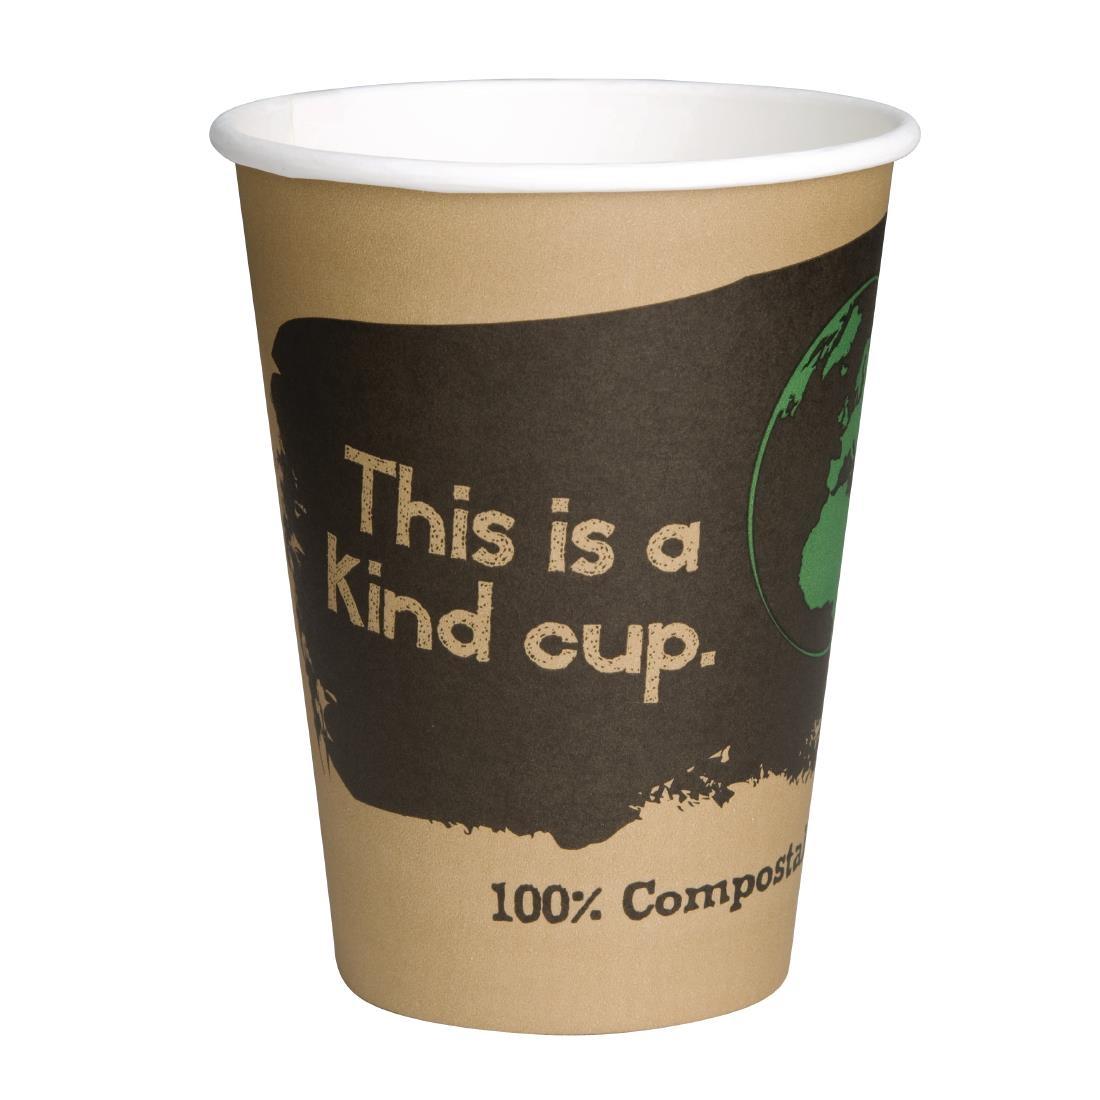 Fiesta Green 8oz Compostable Hot Cups and Lids Bundle (Pack of 50) - SA483  - 3